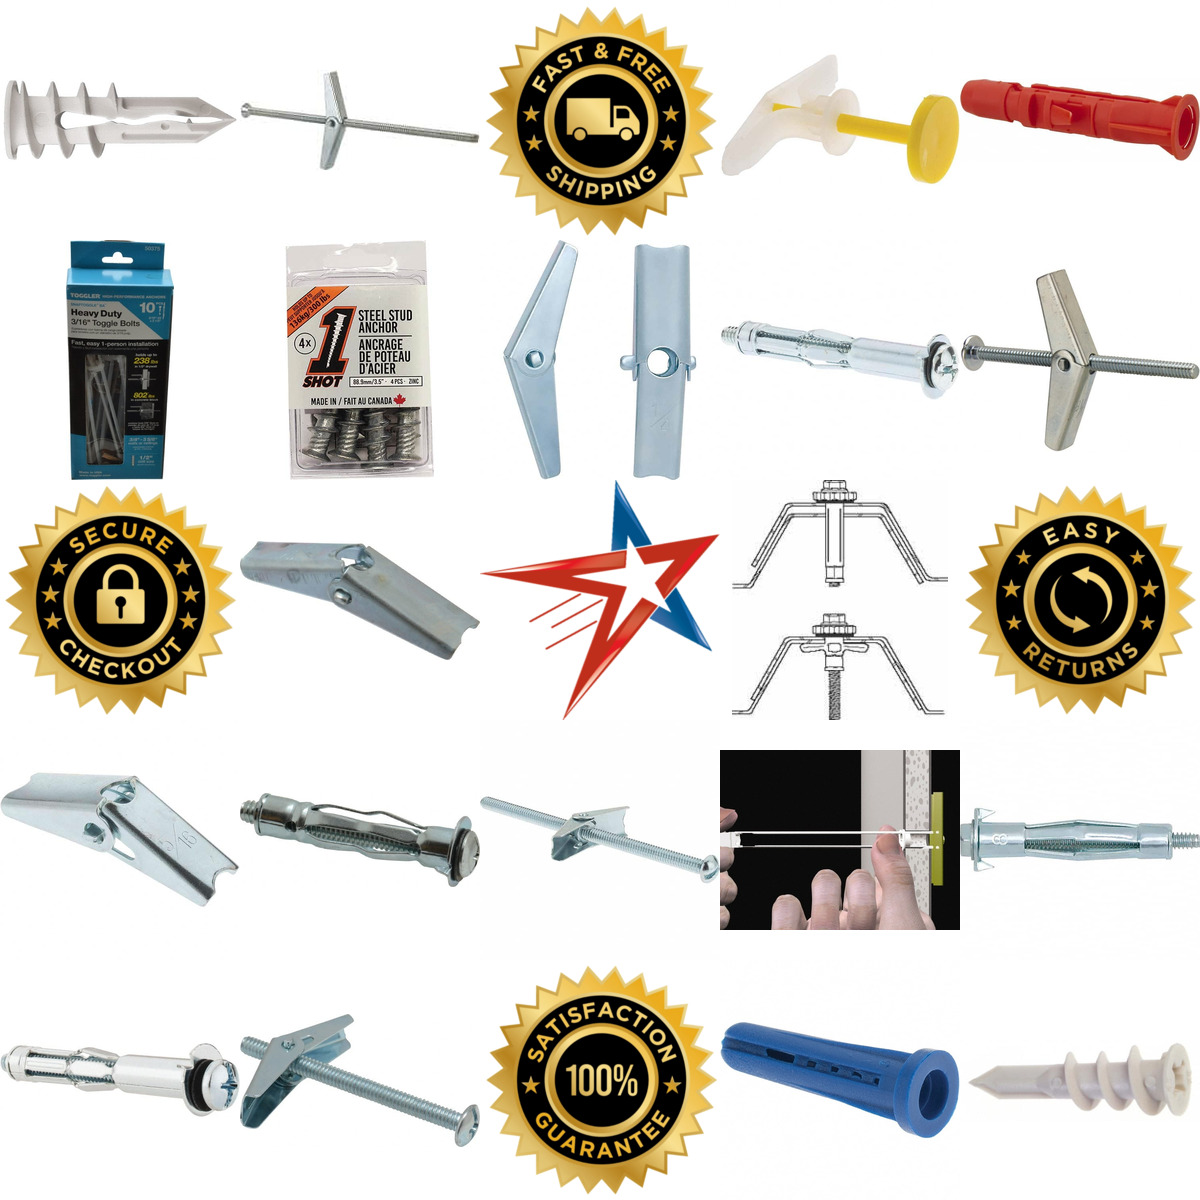 A selection of Drywall and Hollow Wall Anchors products on GoVets